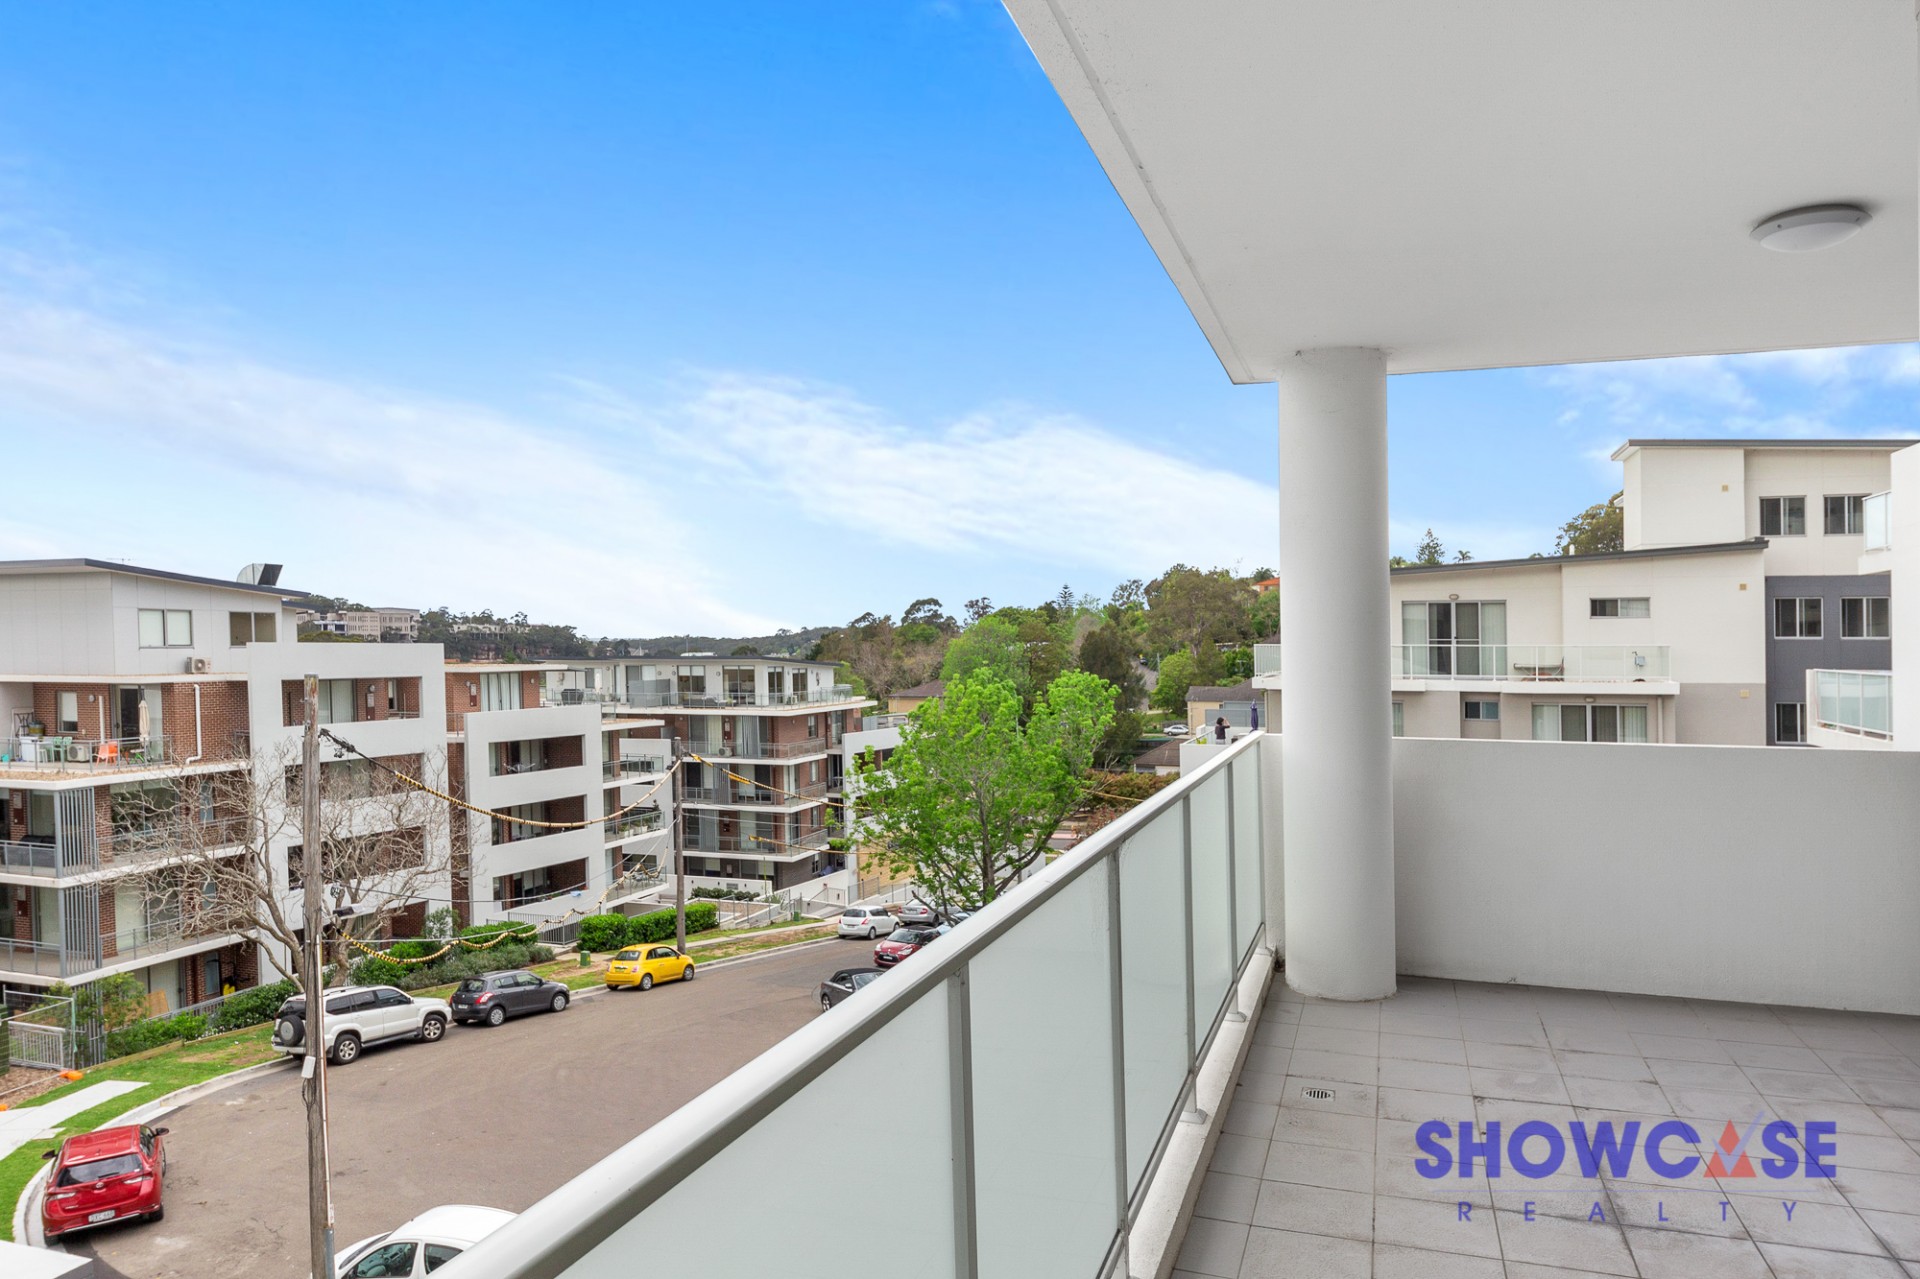 Selling your property in Hornsby